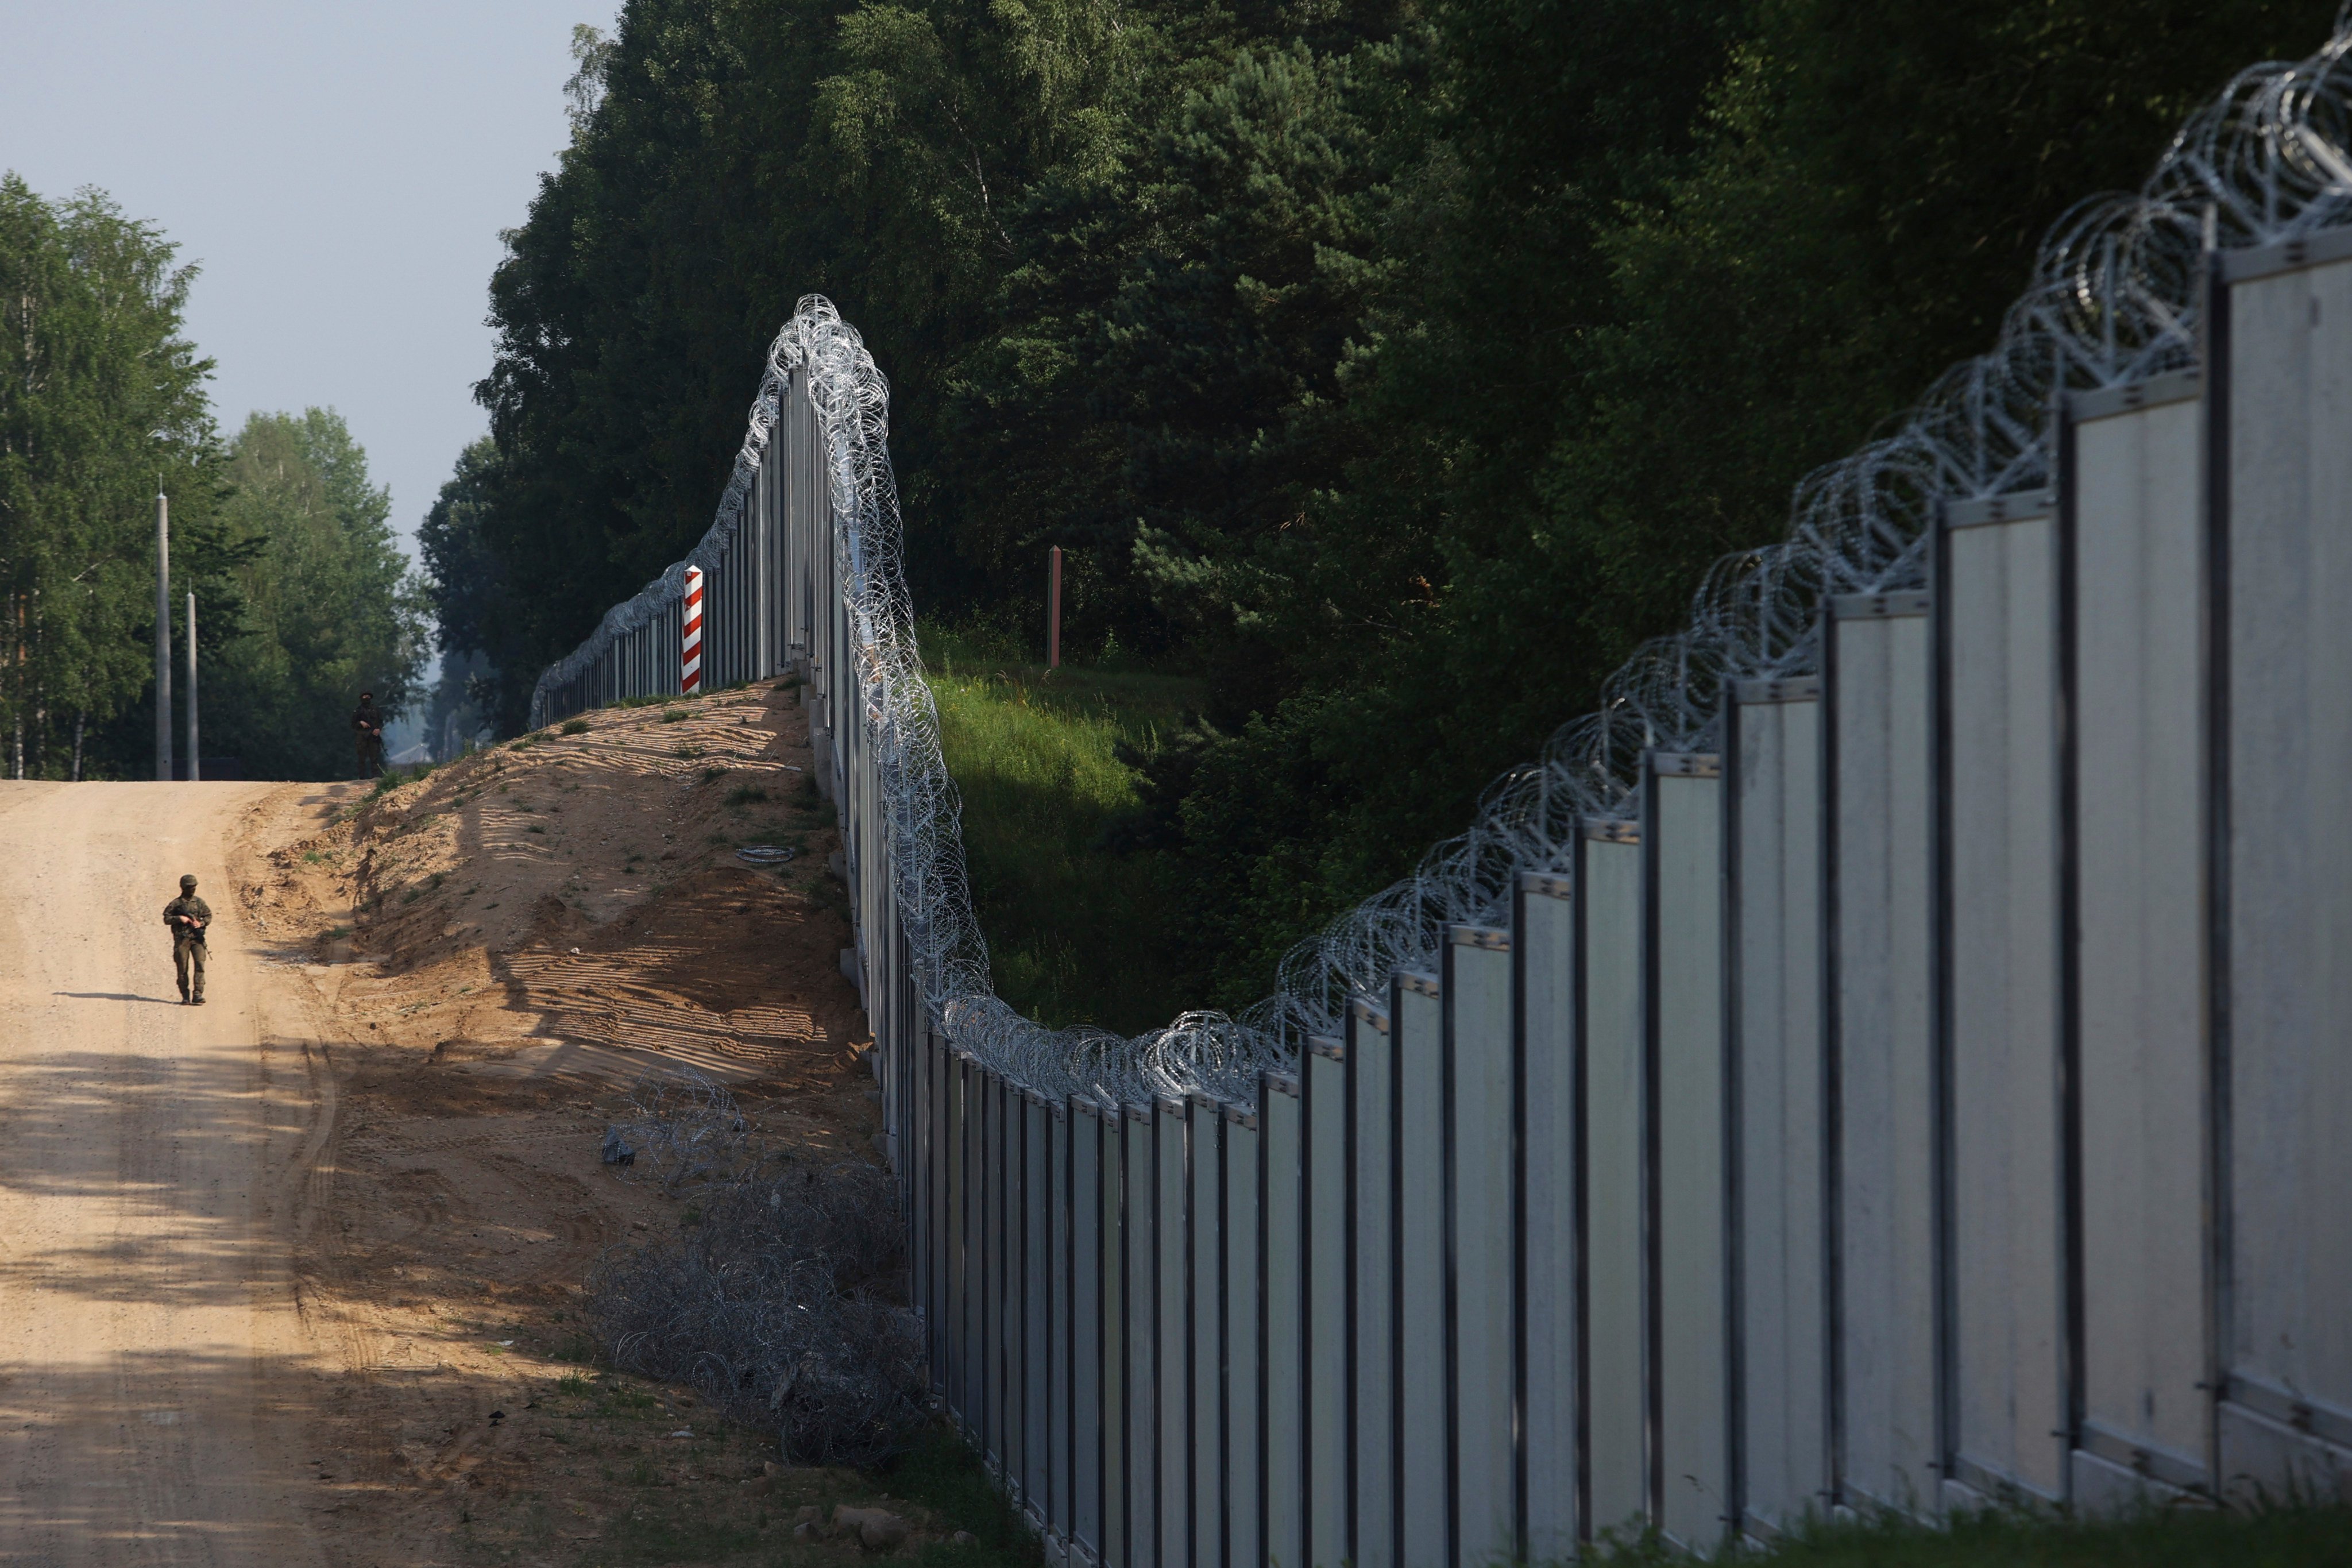 A Polish border guard patrols a metal wall on the border between Poland and Belarus in June. Photo: AP